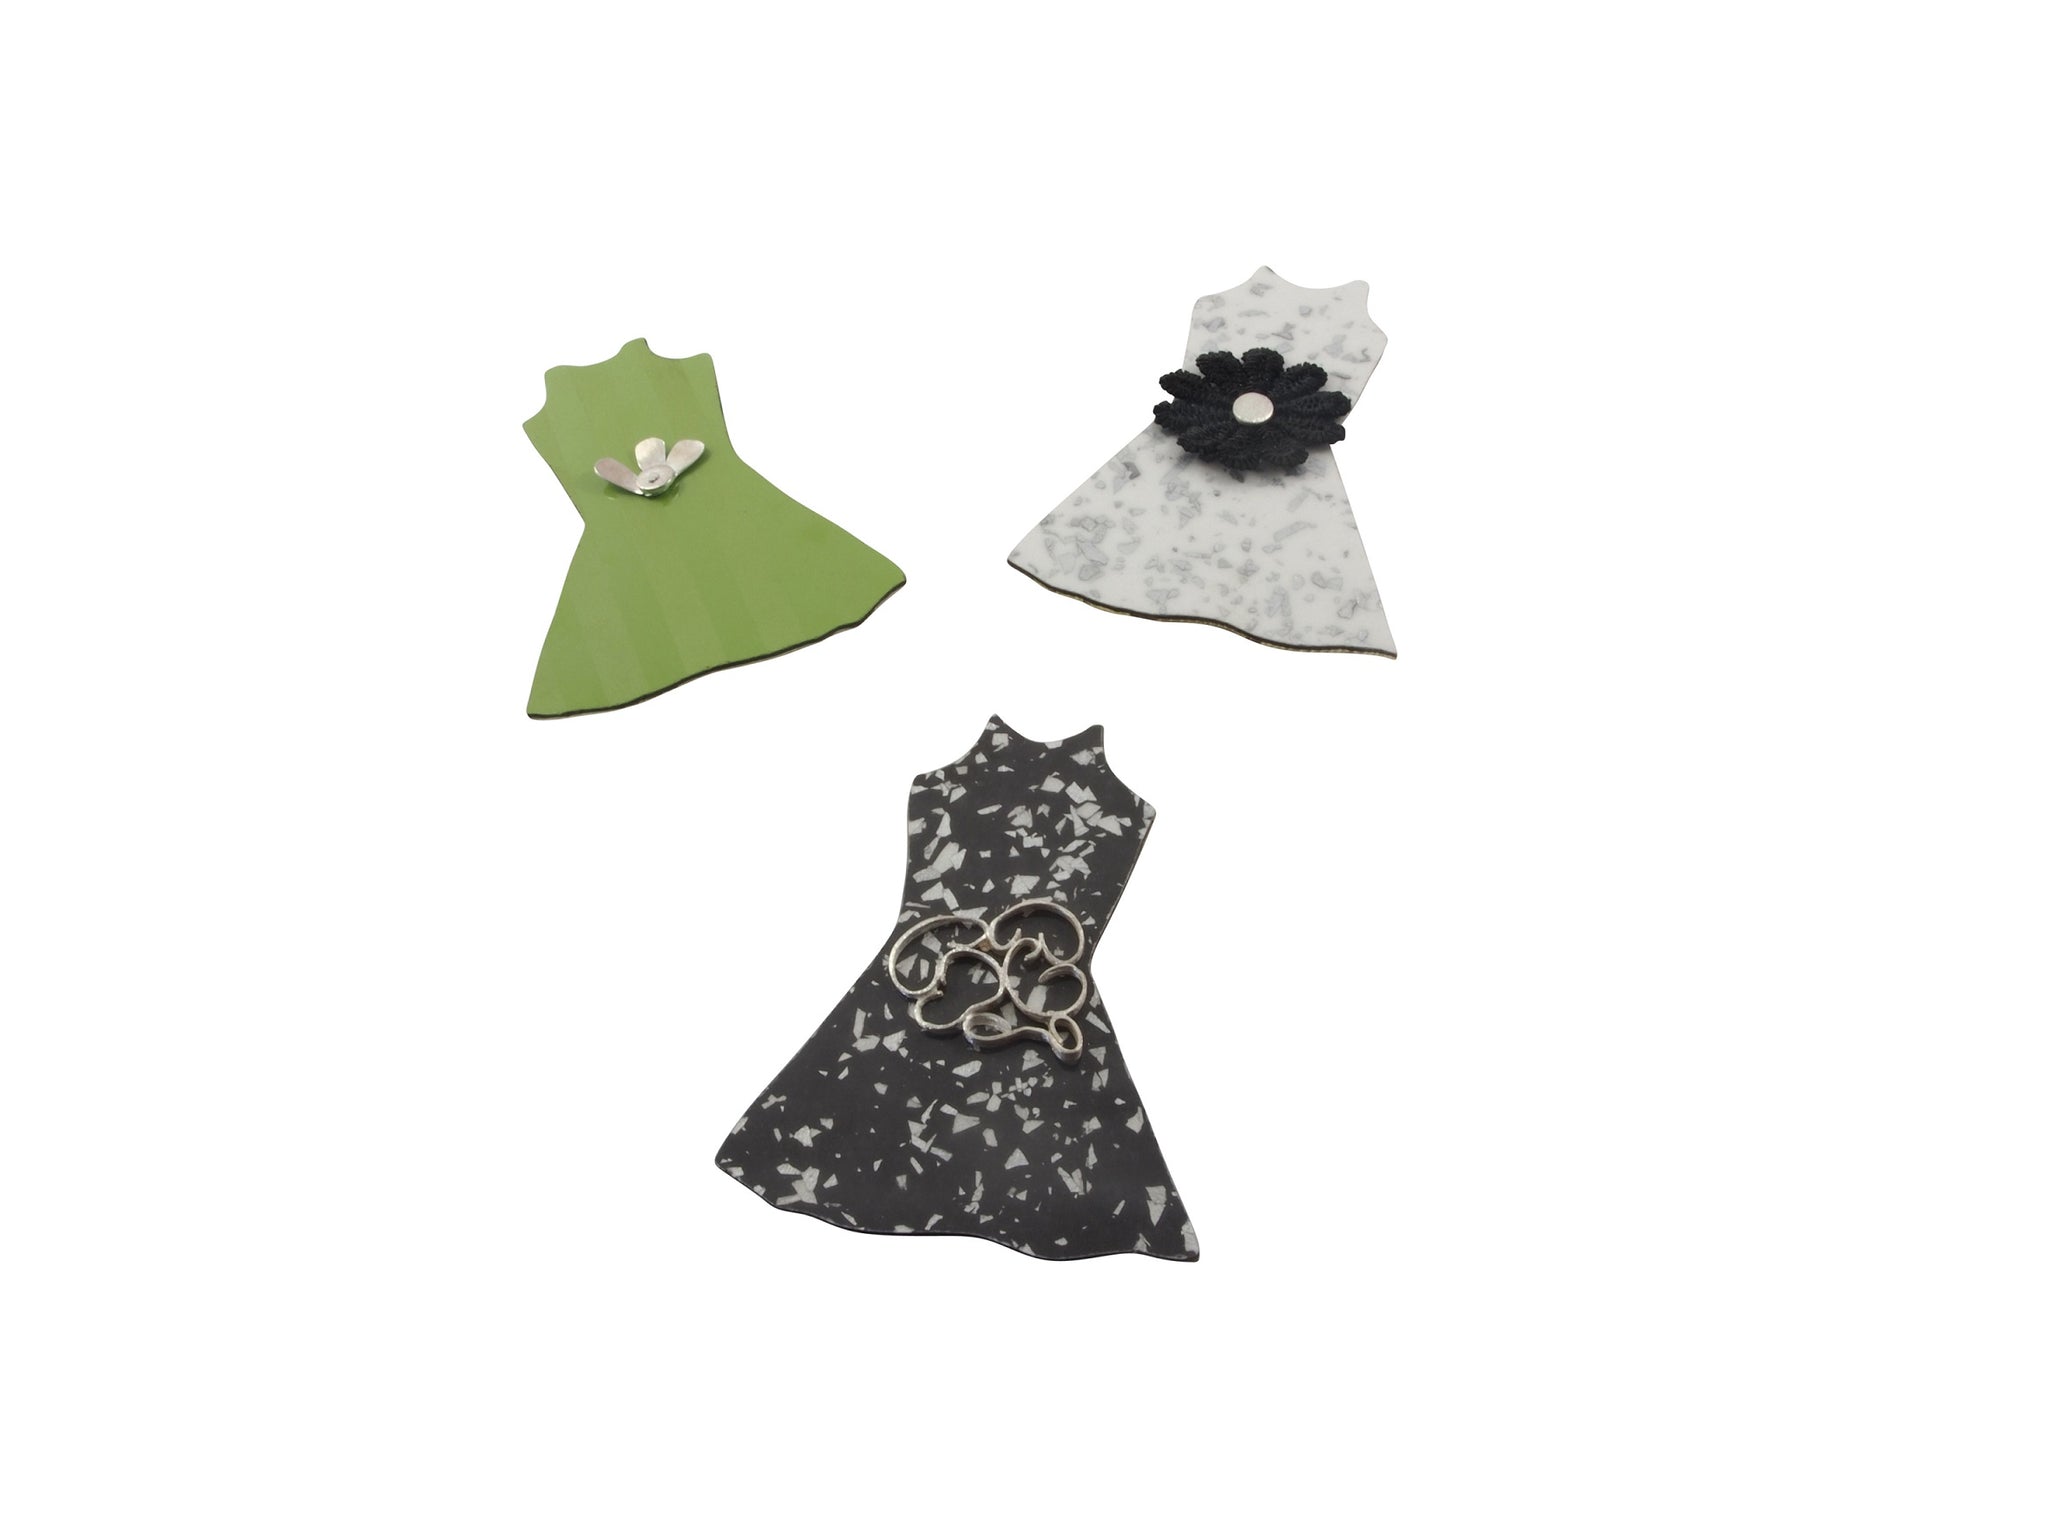 The dressmaker brooches